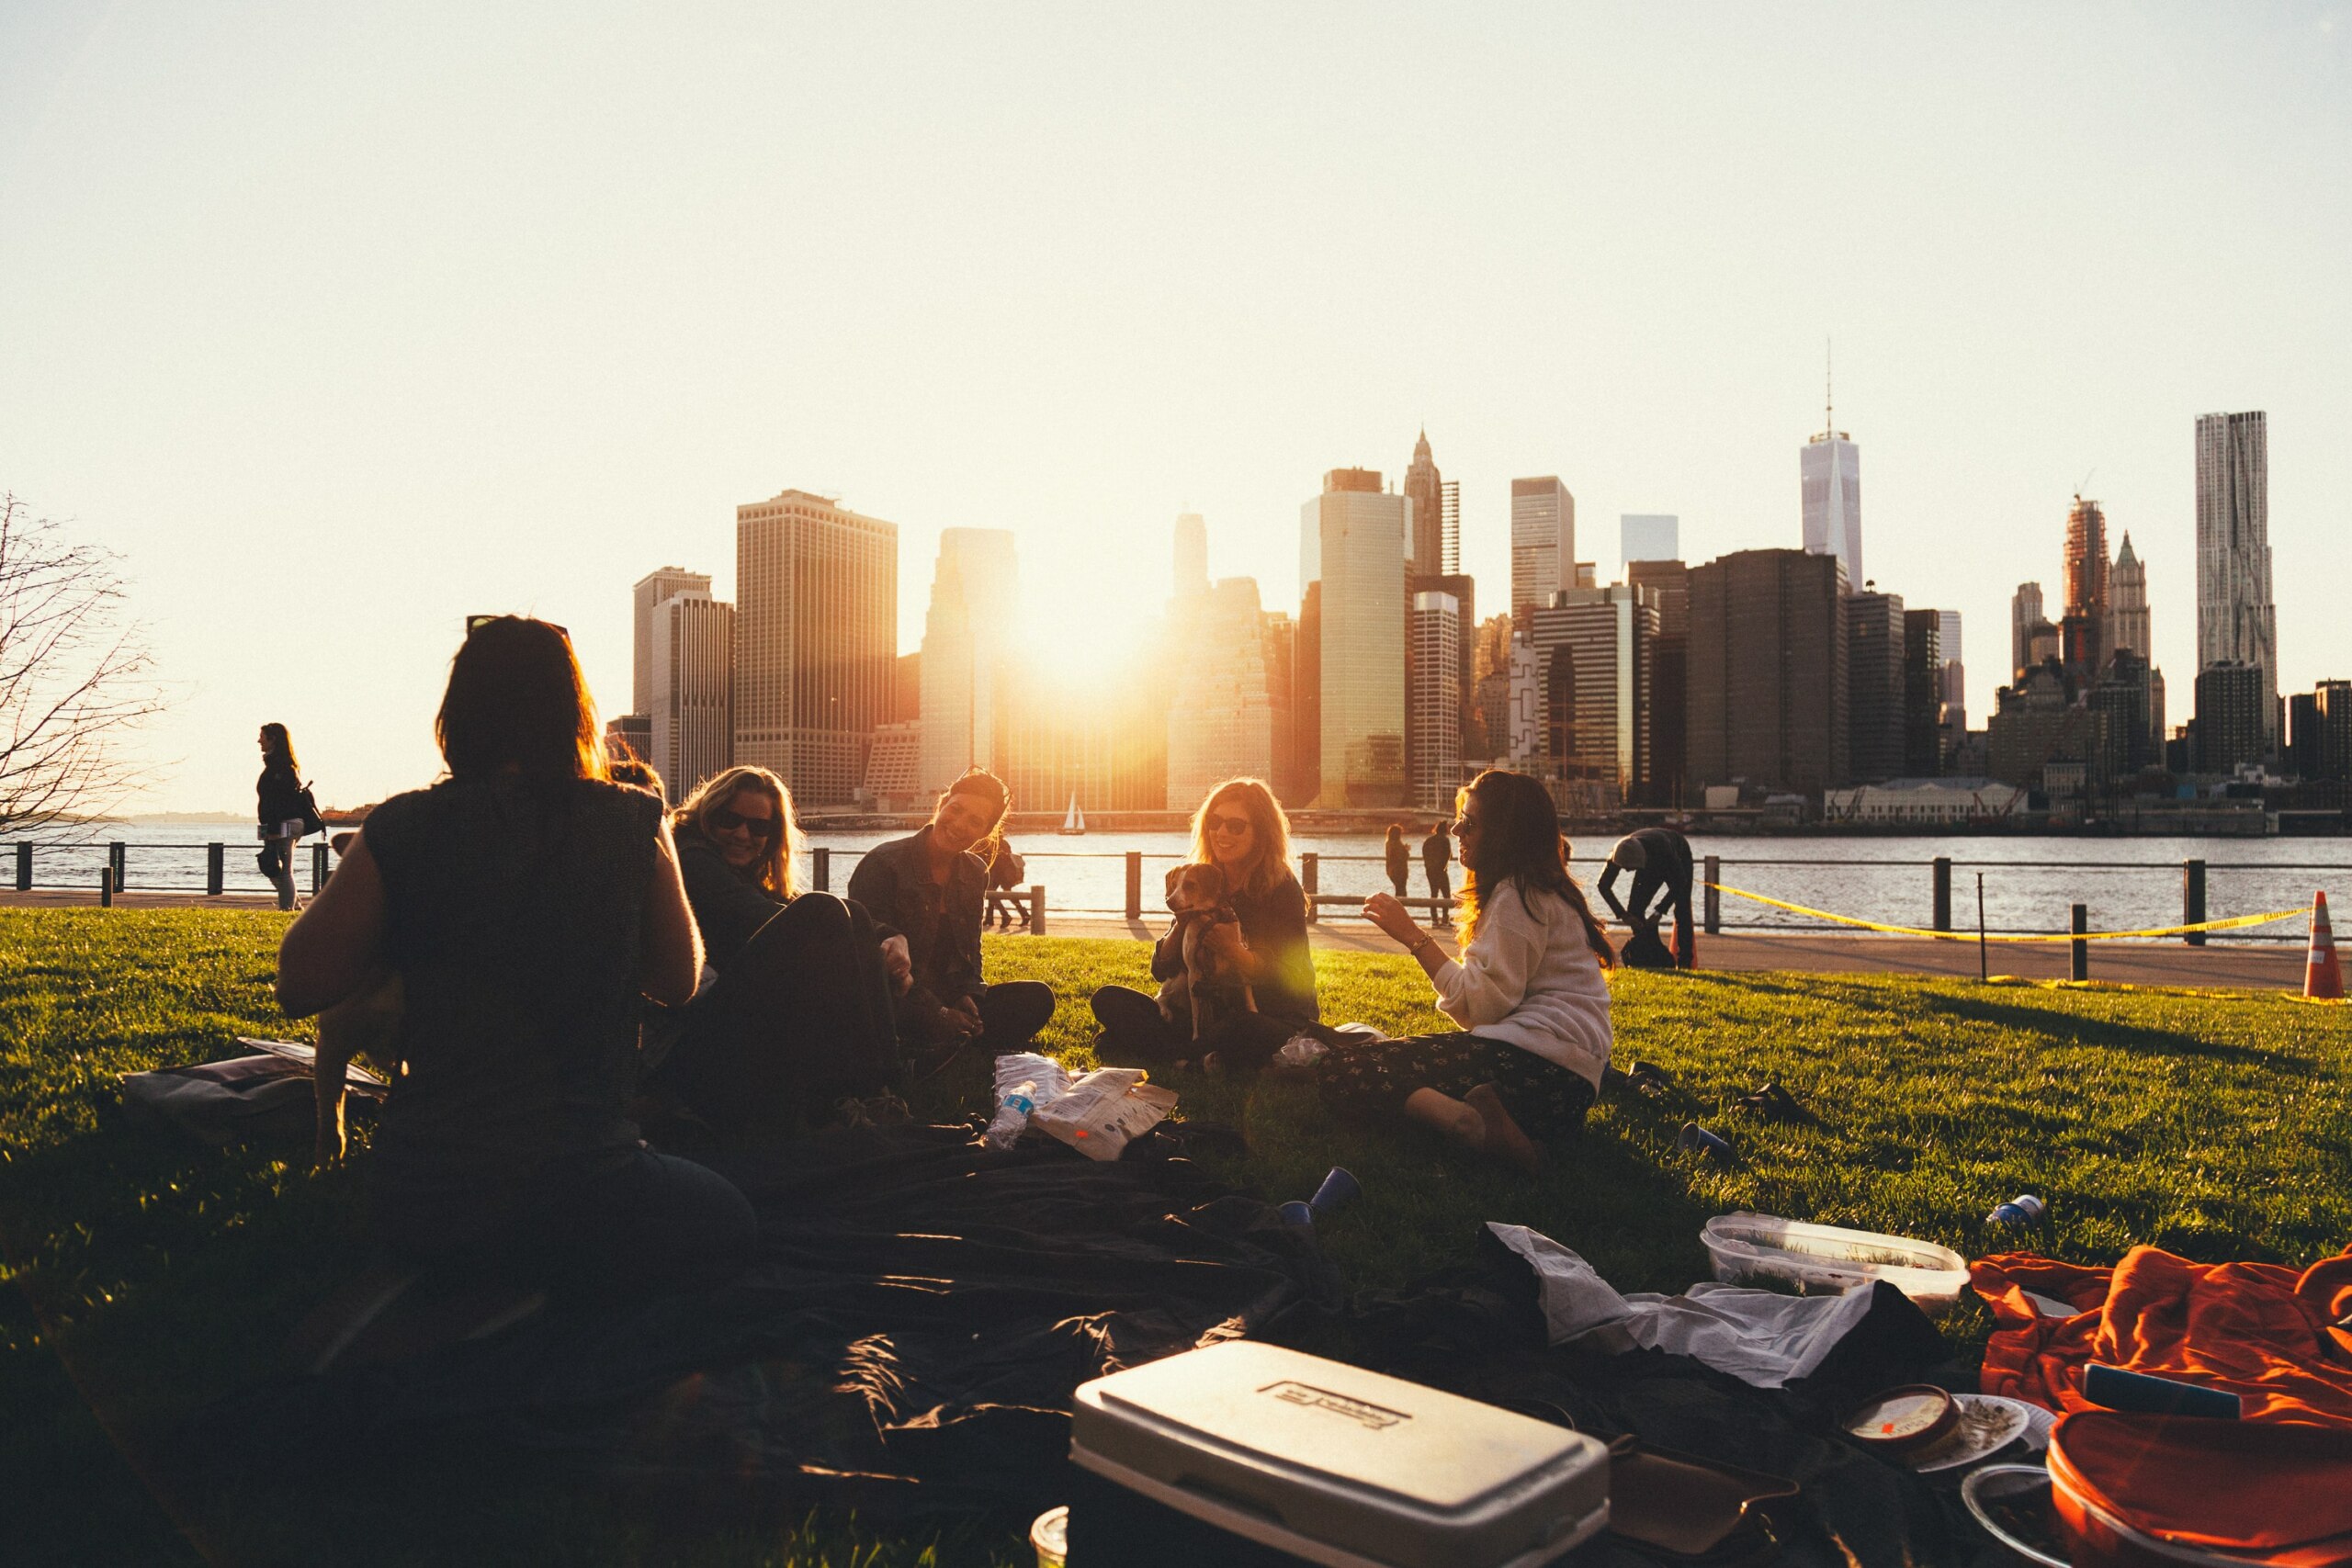 group of people sit outside together with a sunset and city skyline in the background.